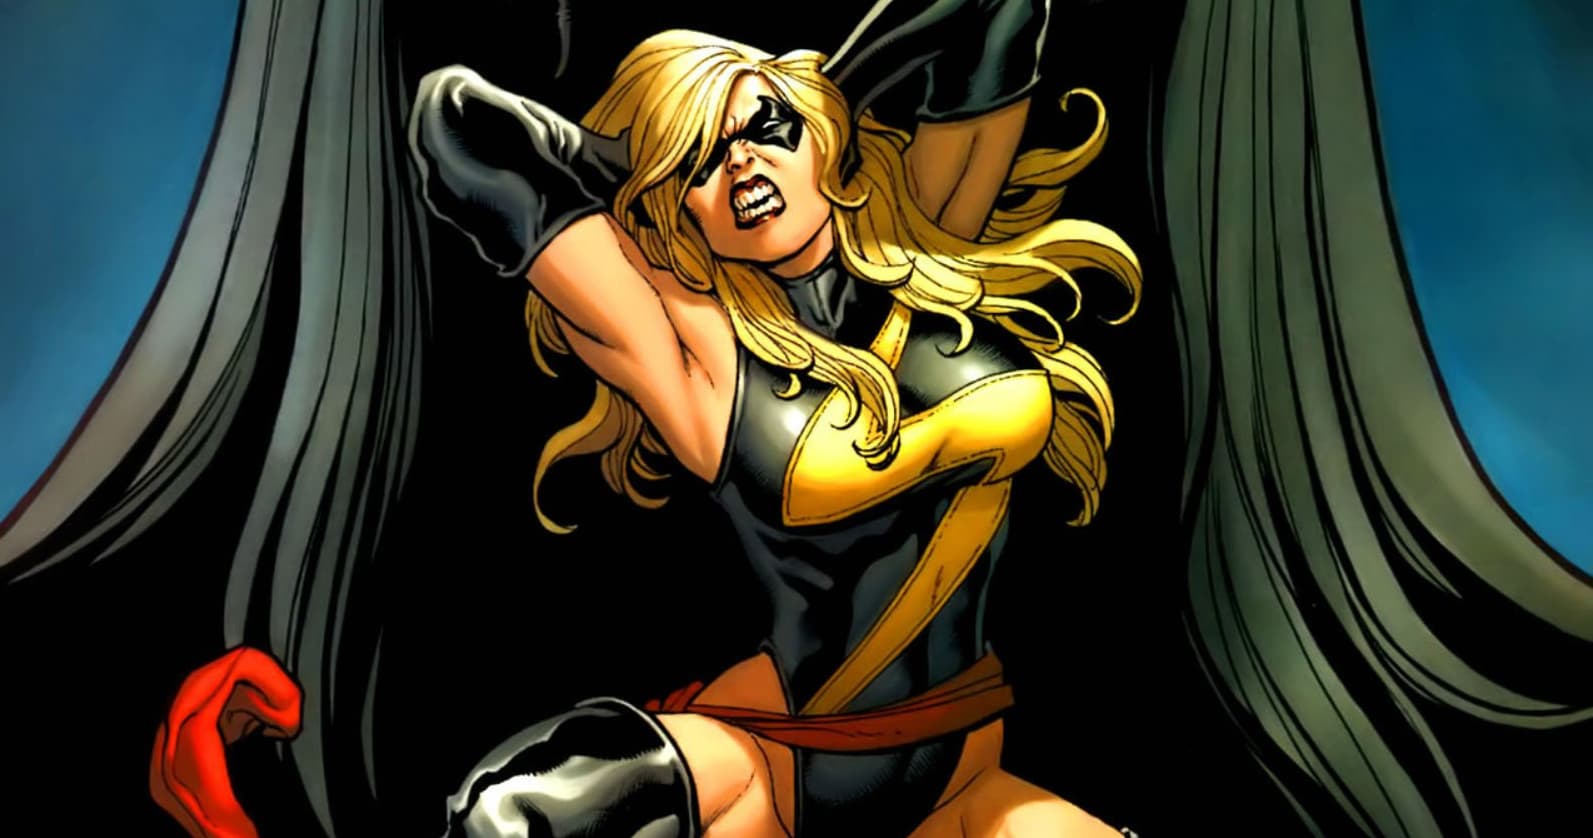 Hottest Female Marvel Characters Most Attractive Female Marvel Characters 7693